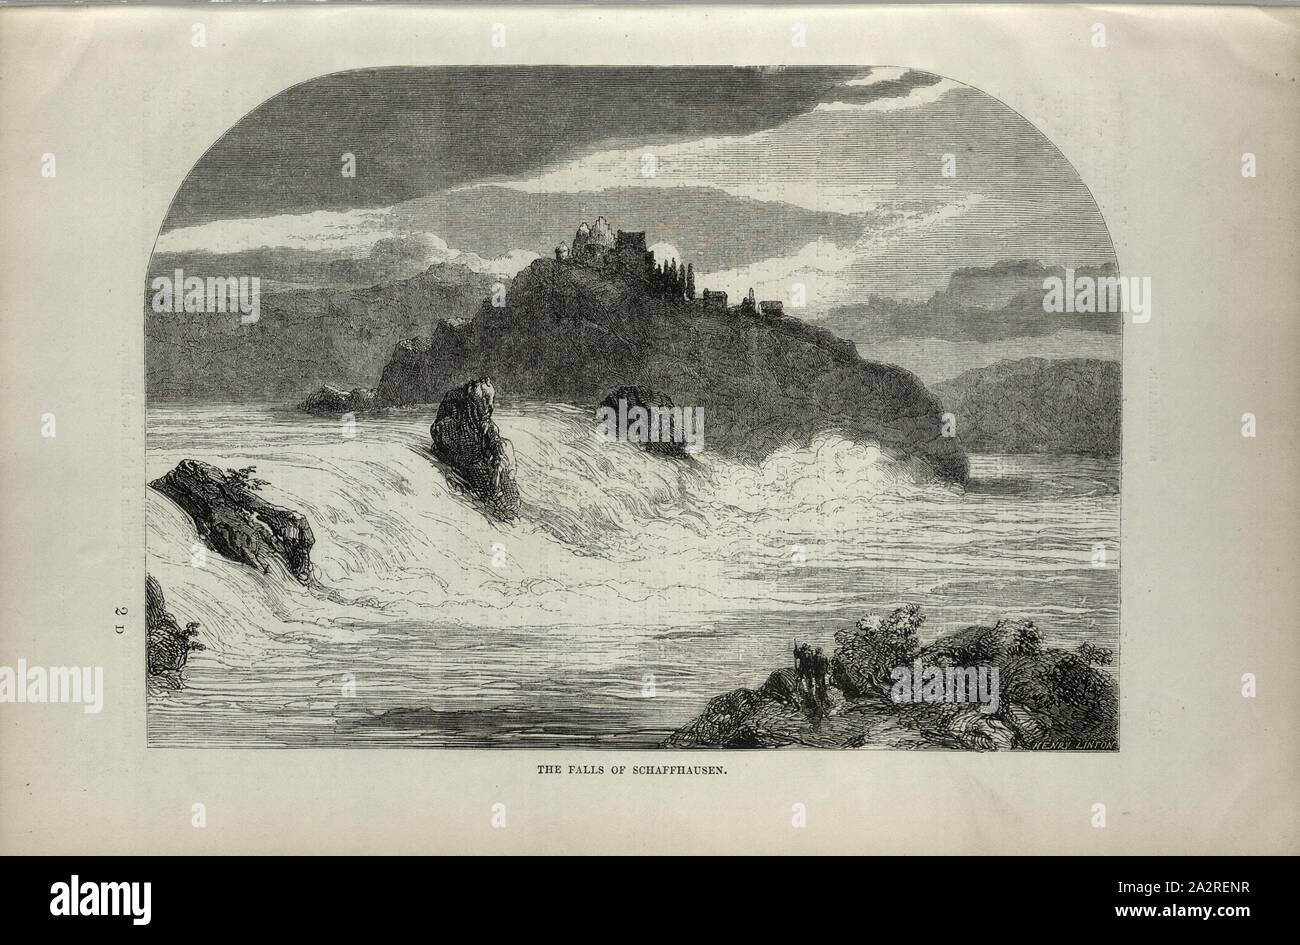 The falls of Schaffhausen, View of the Rhine Falls, S. 401, Linton, Henry, 1854, Charles Williams, The Alps, Switzerland, and the North of Italy. London: Cassell, 1854 Stock Photo